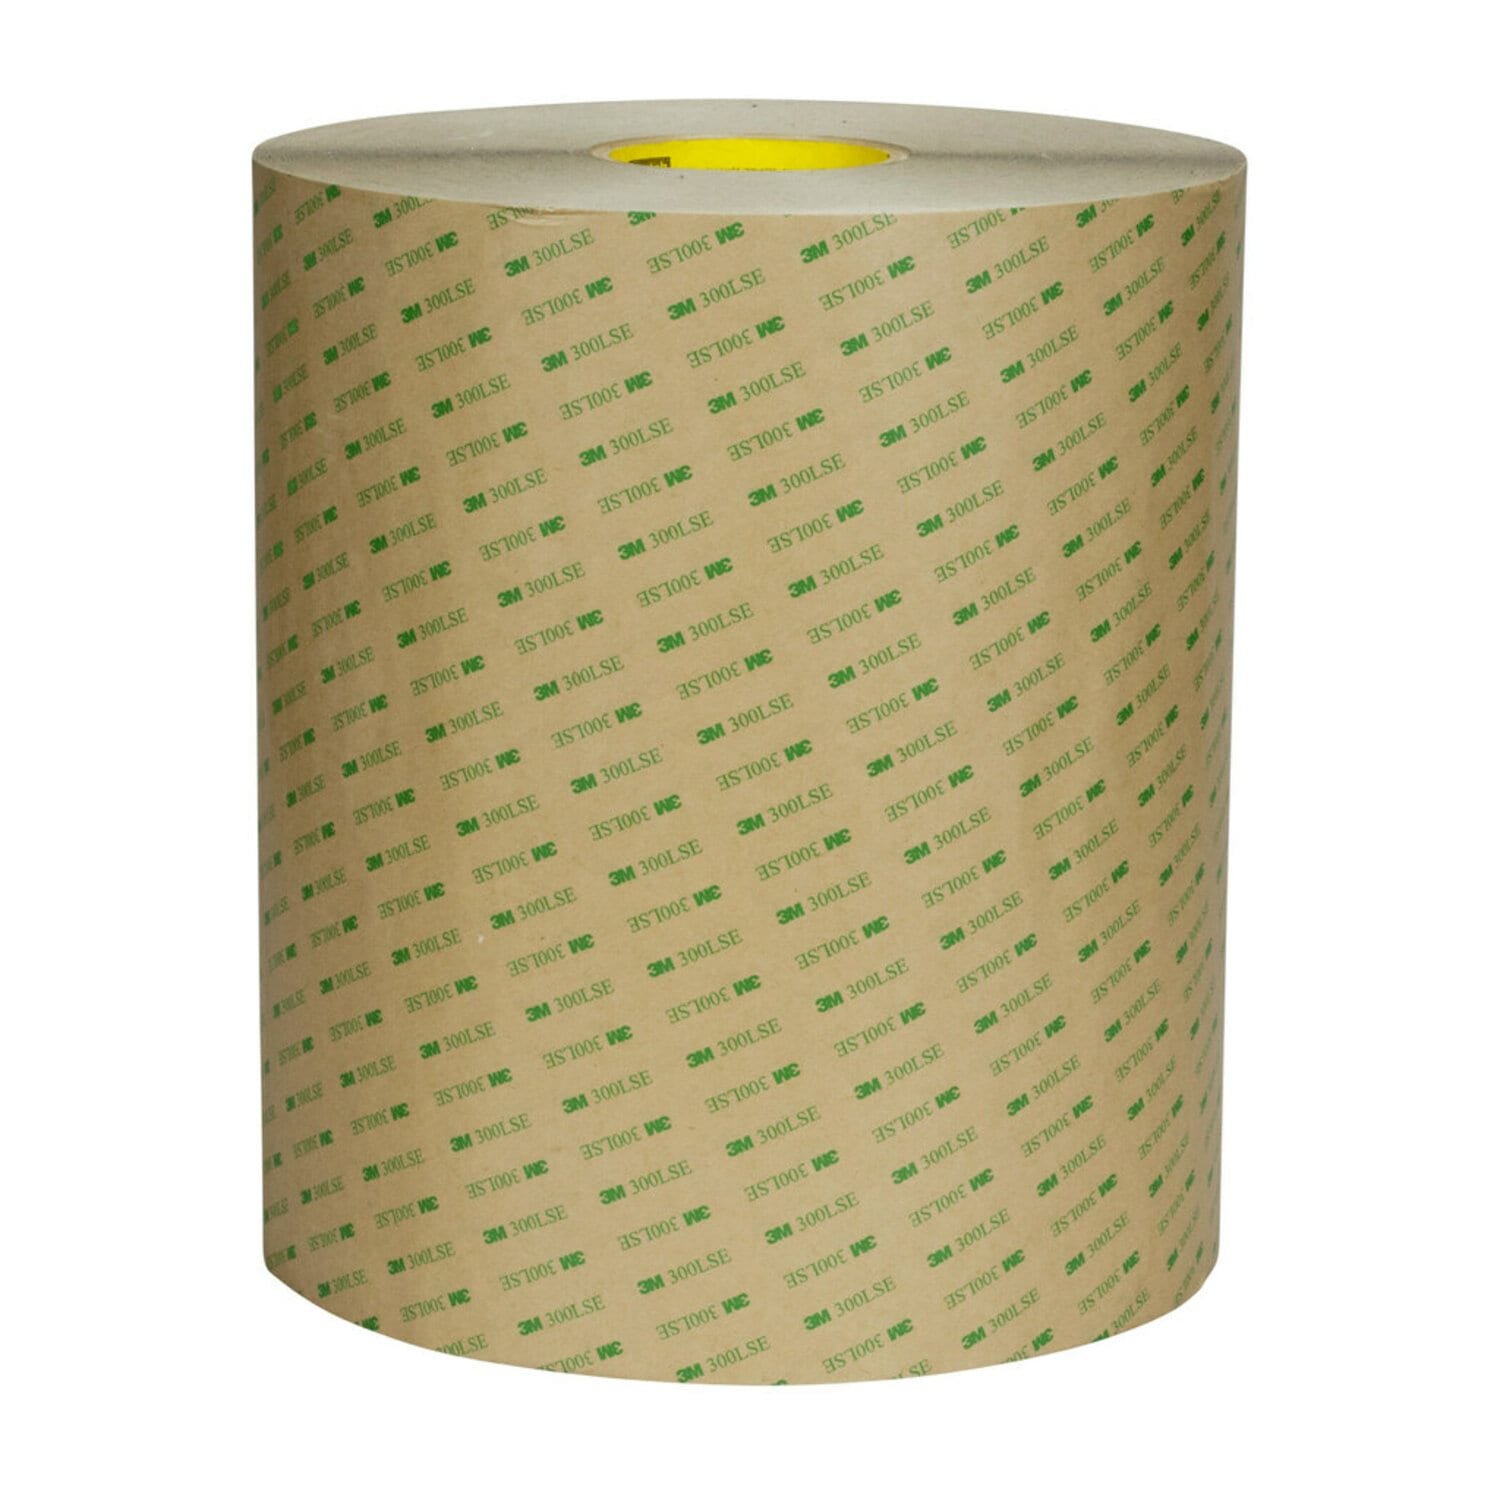 7100013037 - 3M Double Coated Tape 93020LE, Clear, 7.9 mil, Roll, Config